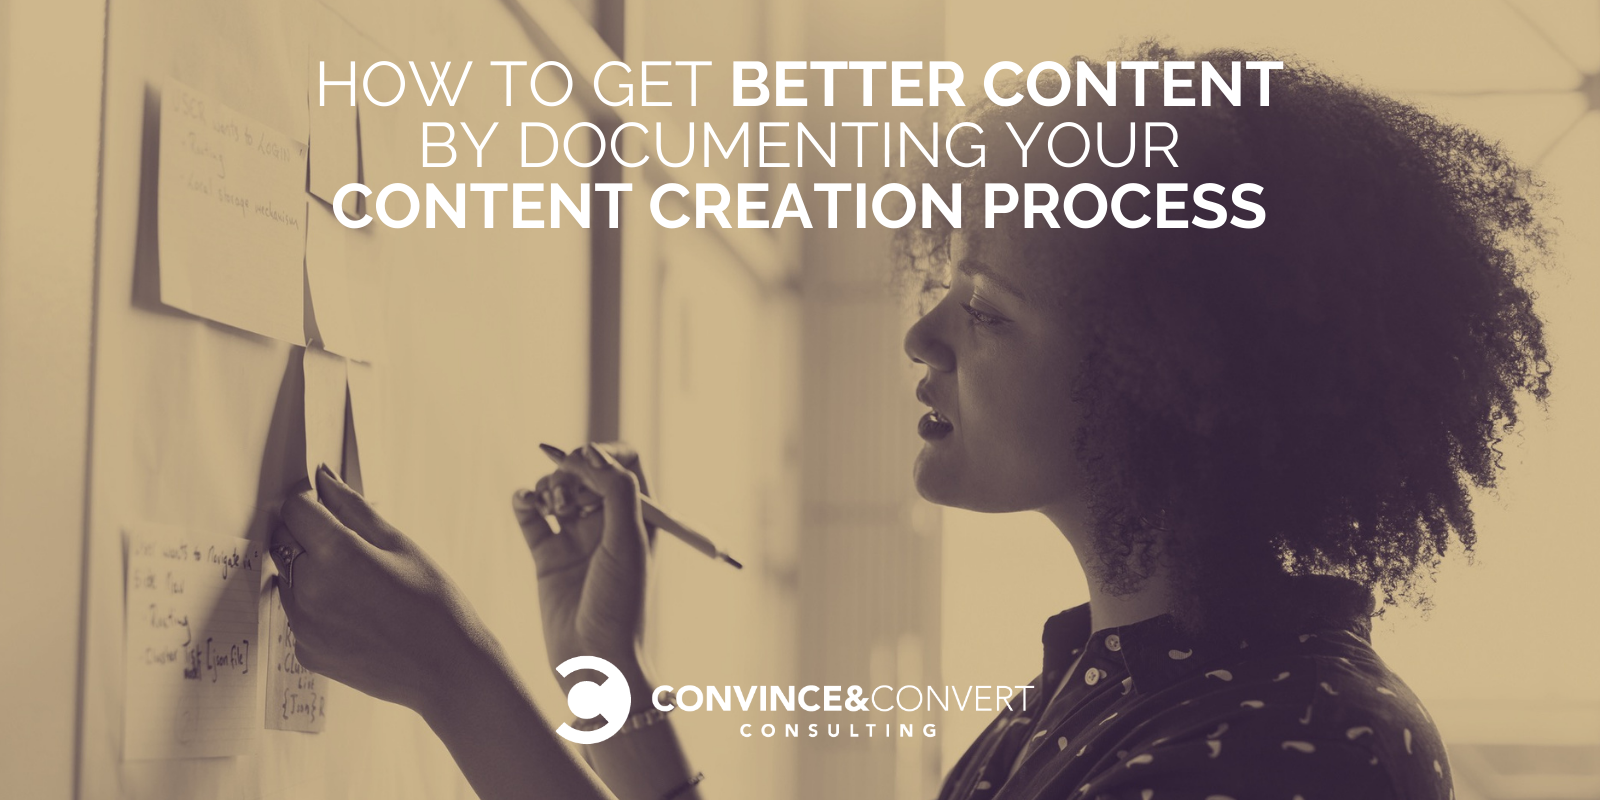 How to Get Better Content by Documenting Your Content Creation Process